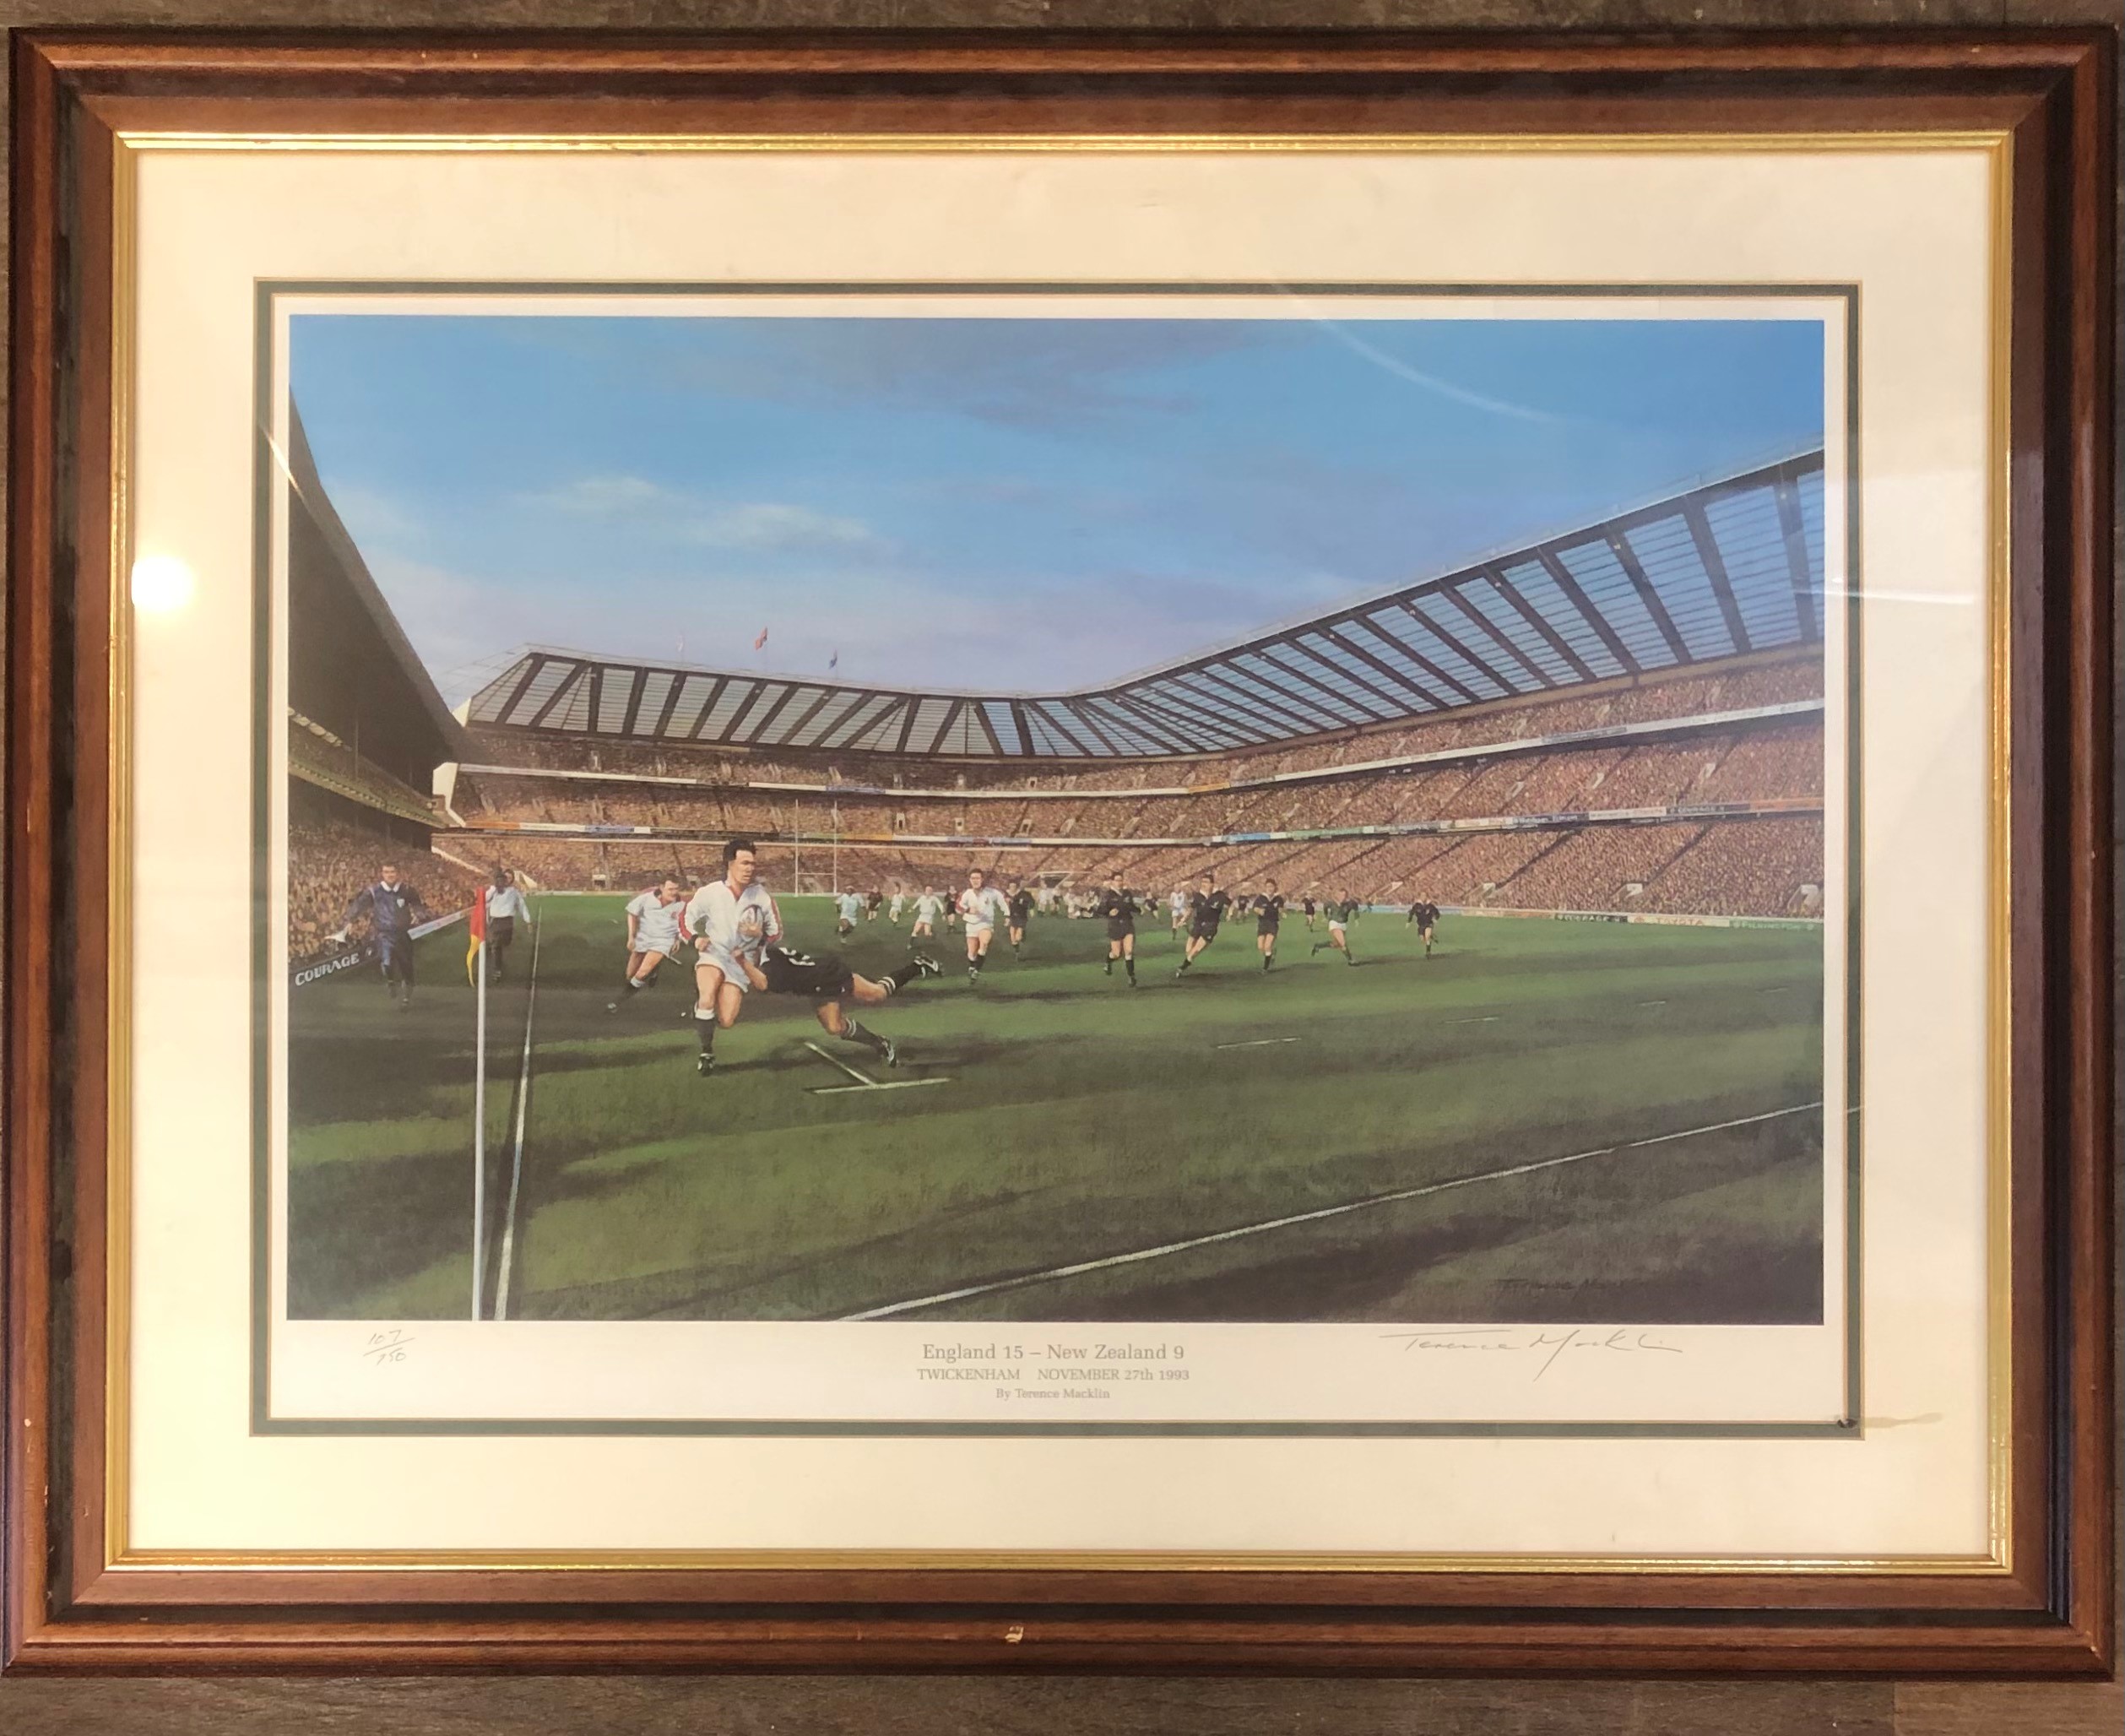 MAGGIE ROWE, LIMITED EDITION PRINT 3/250 Titled 'The Cricket Match', signed, along with Terence